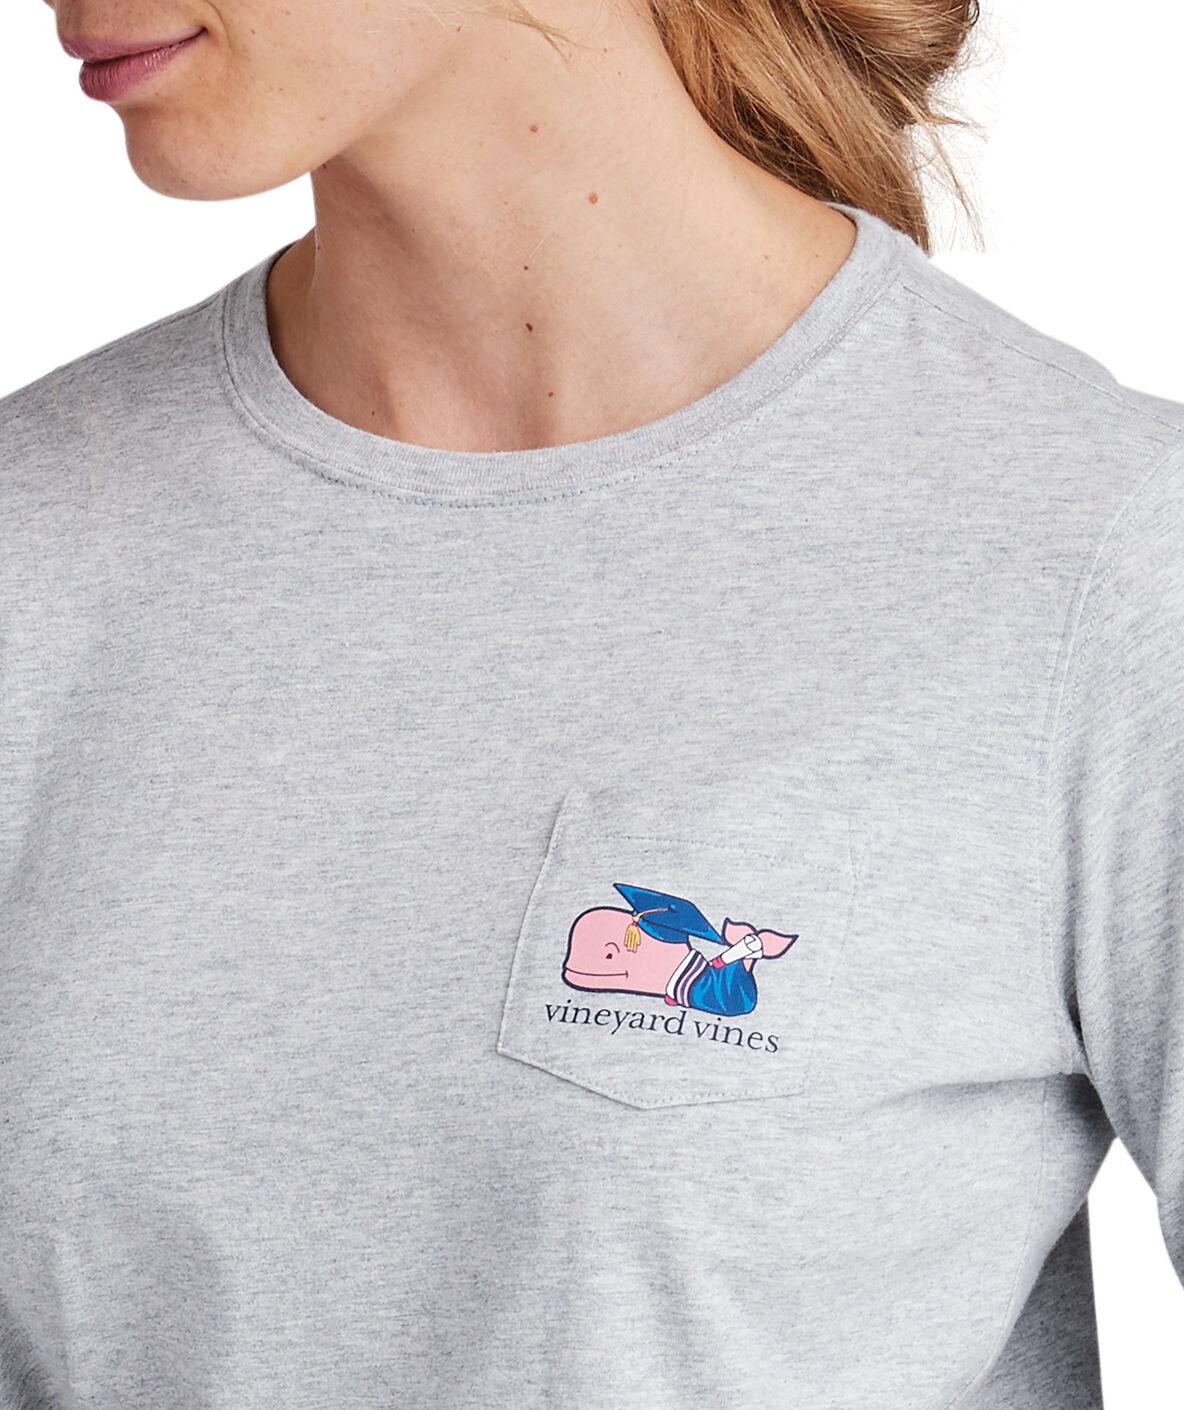 Shop Limited-Edition Nurse Whale Short-Sleeve Pocket Tee at